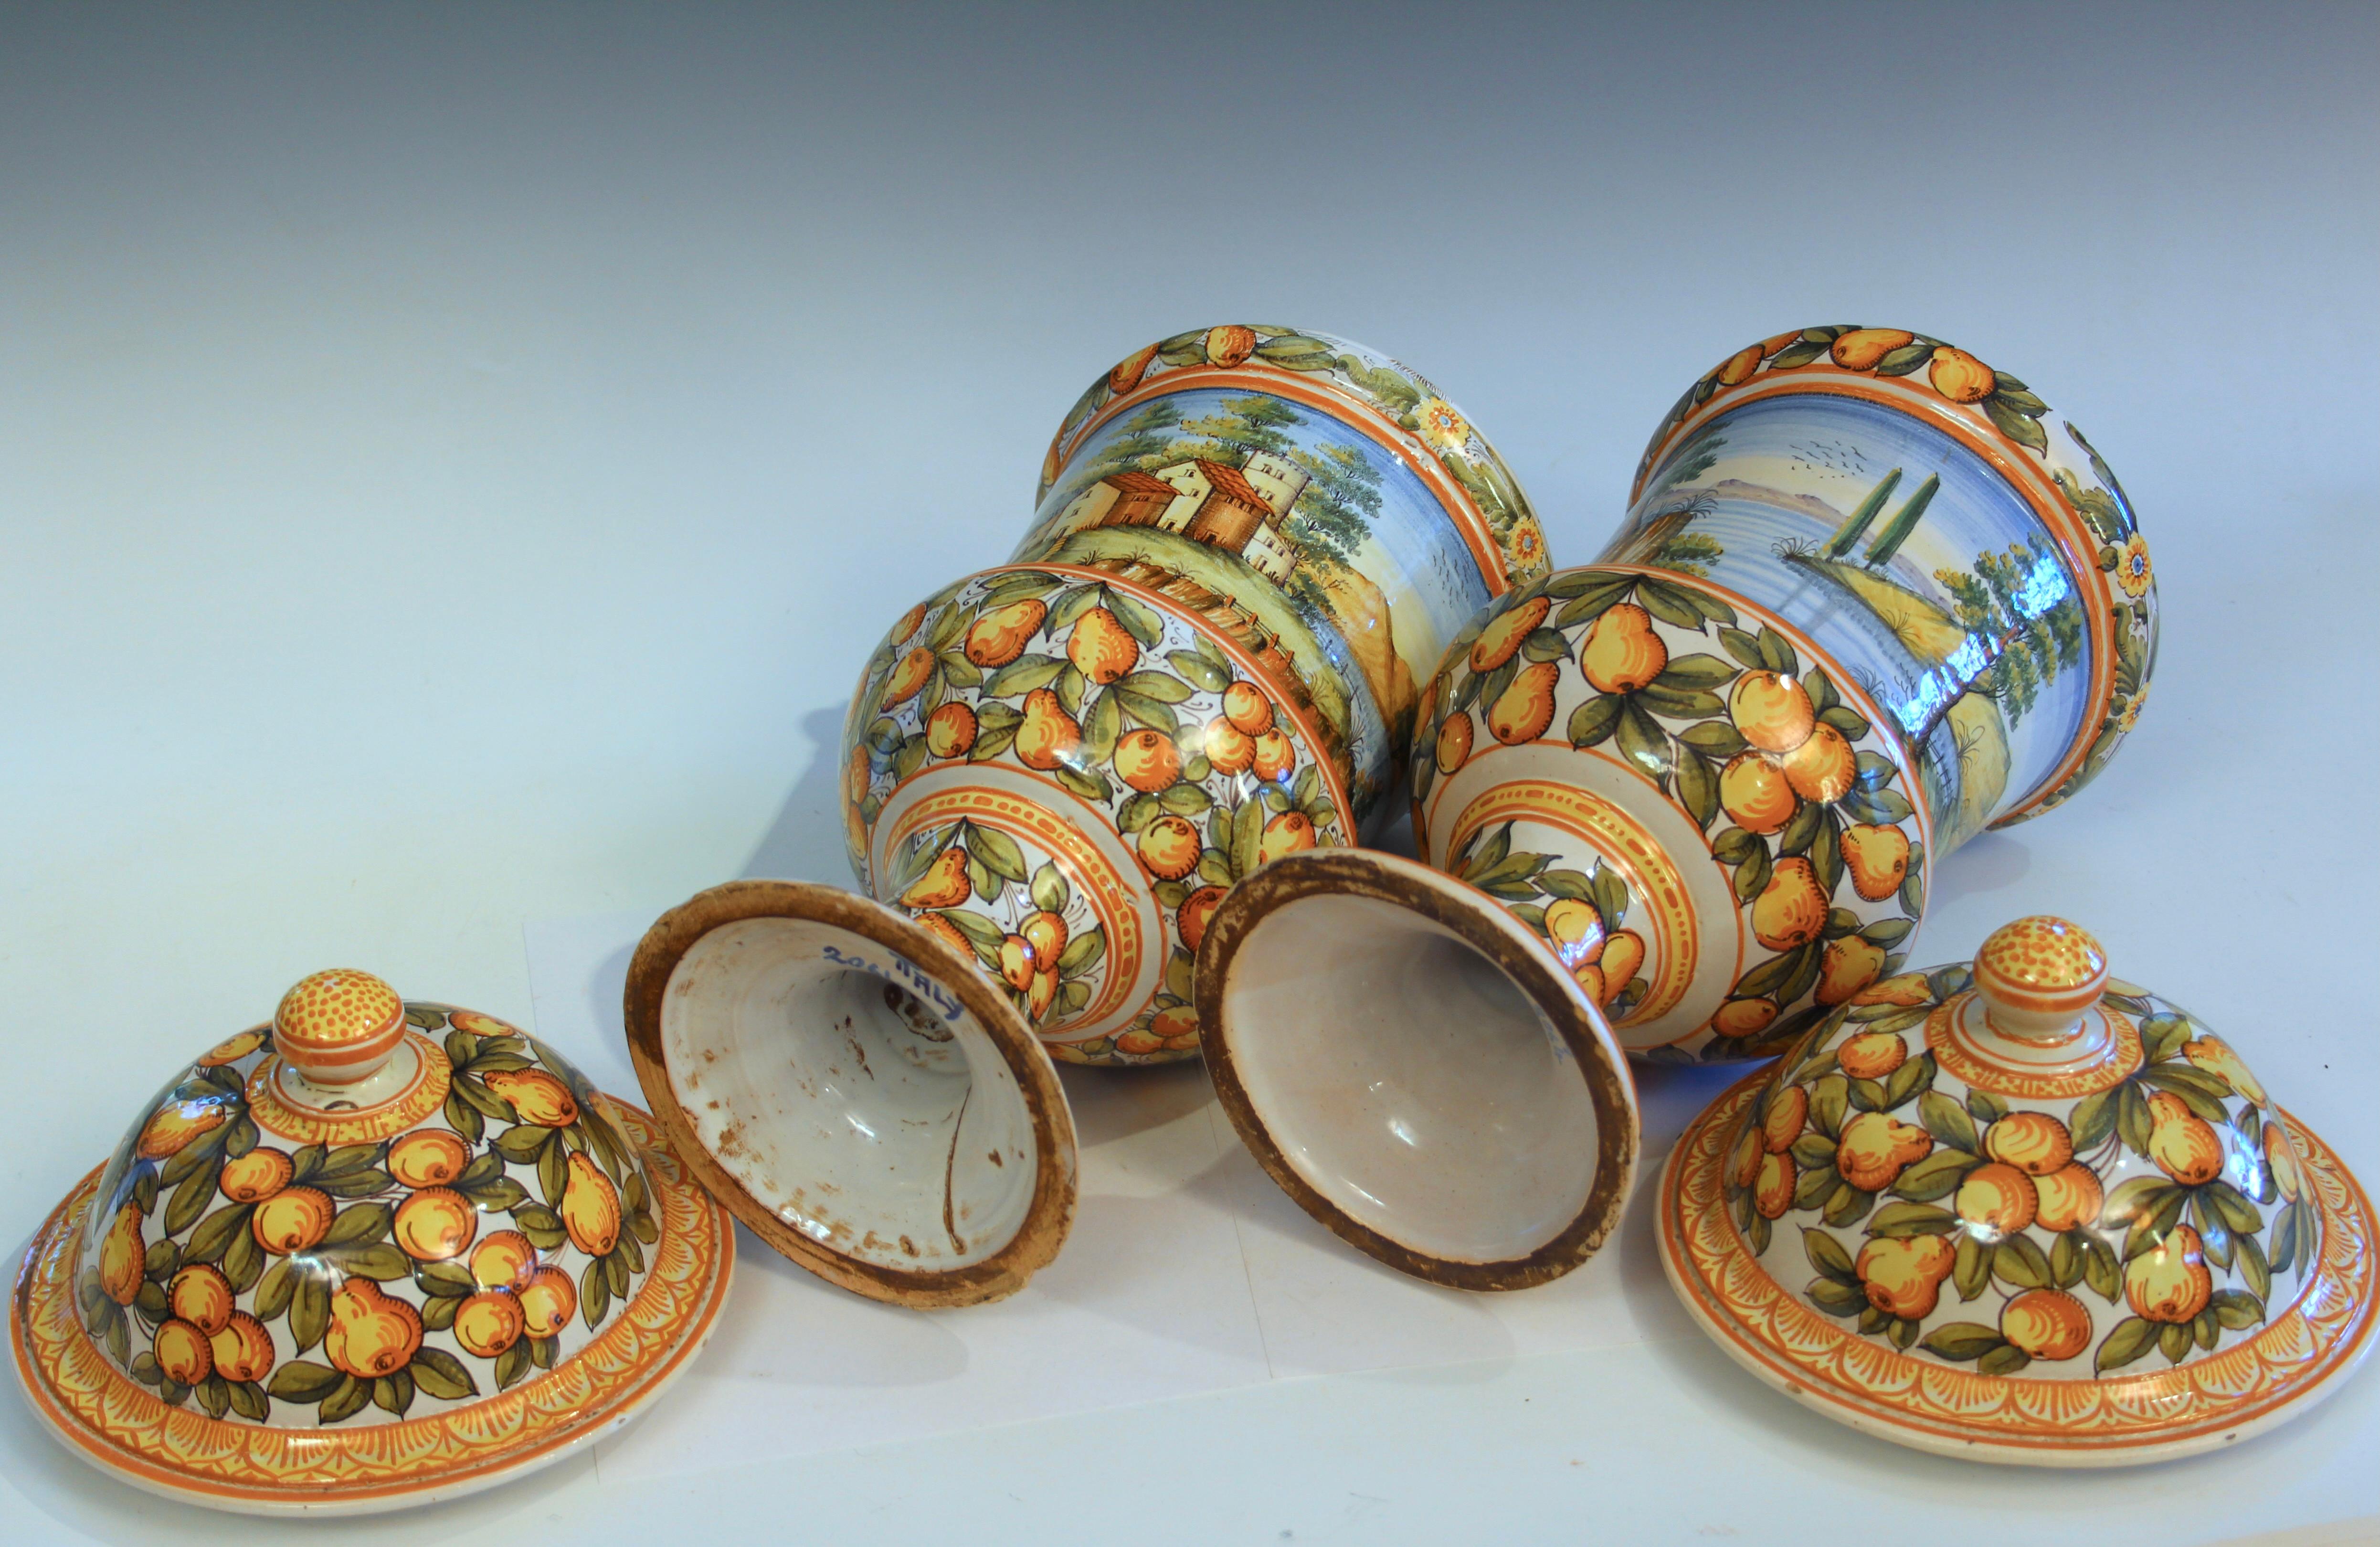 Antique Deruta Pottery Pair Urns Covers Italian Vintage Majolica Vases Jars In Good Condition For Sale In Wilton, CT